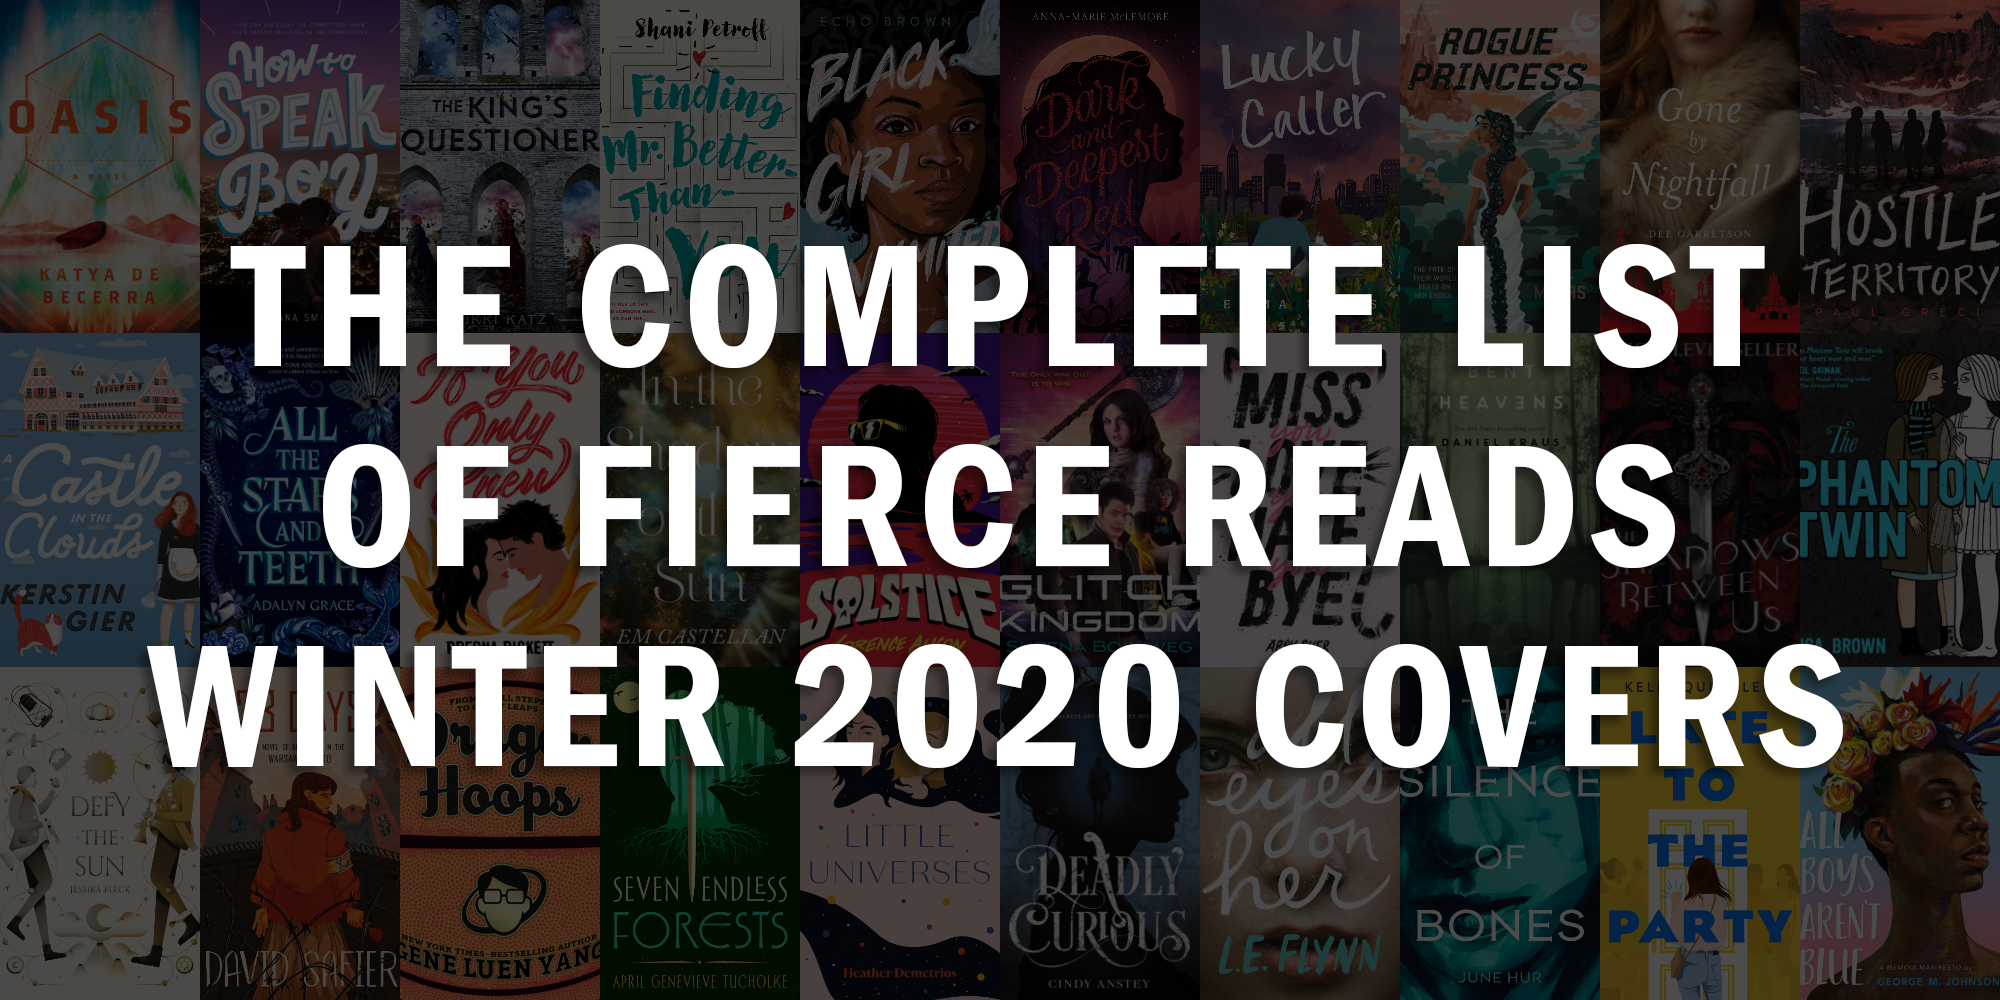 The Complete List of Fierce Reads Winter 2020 Covers